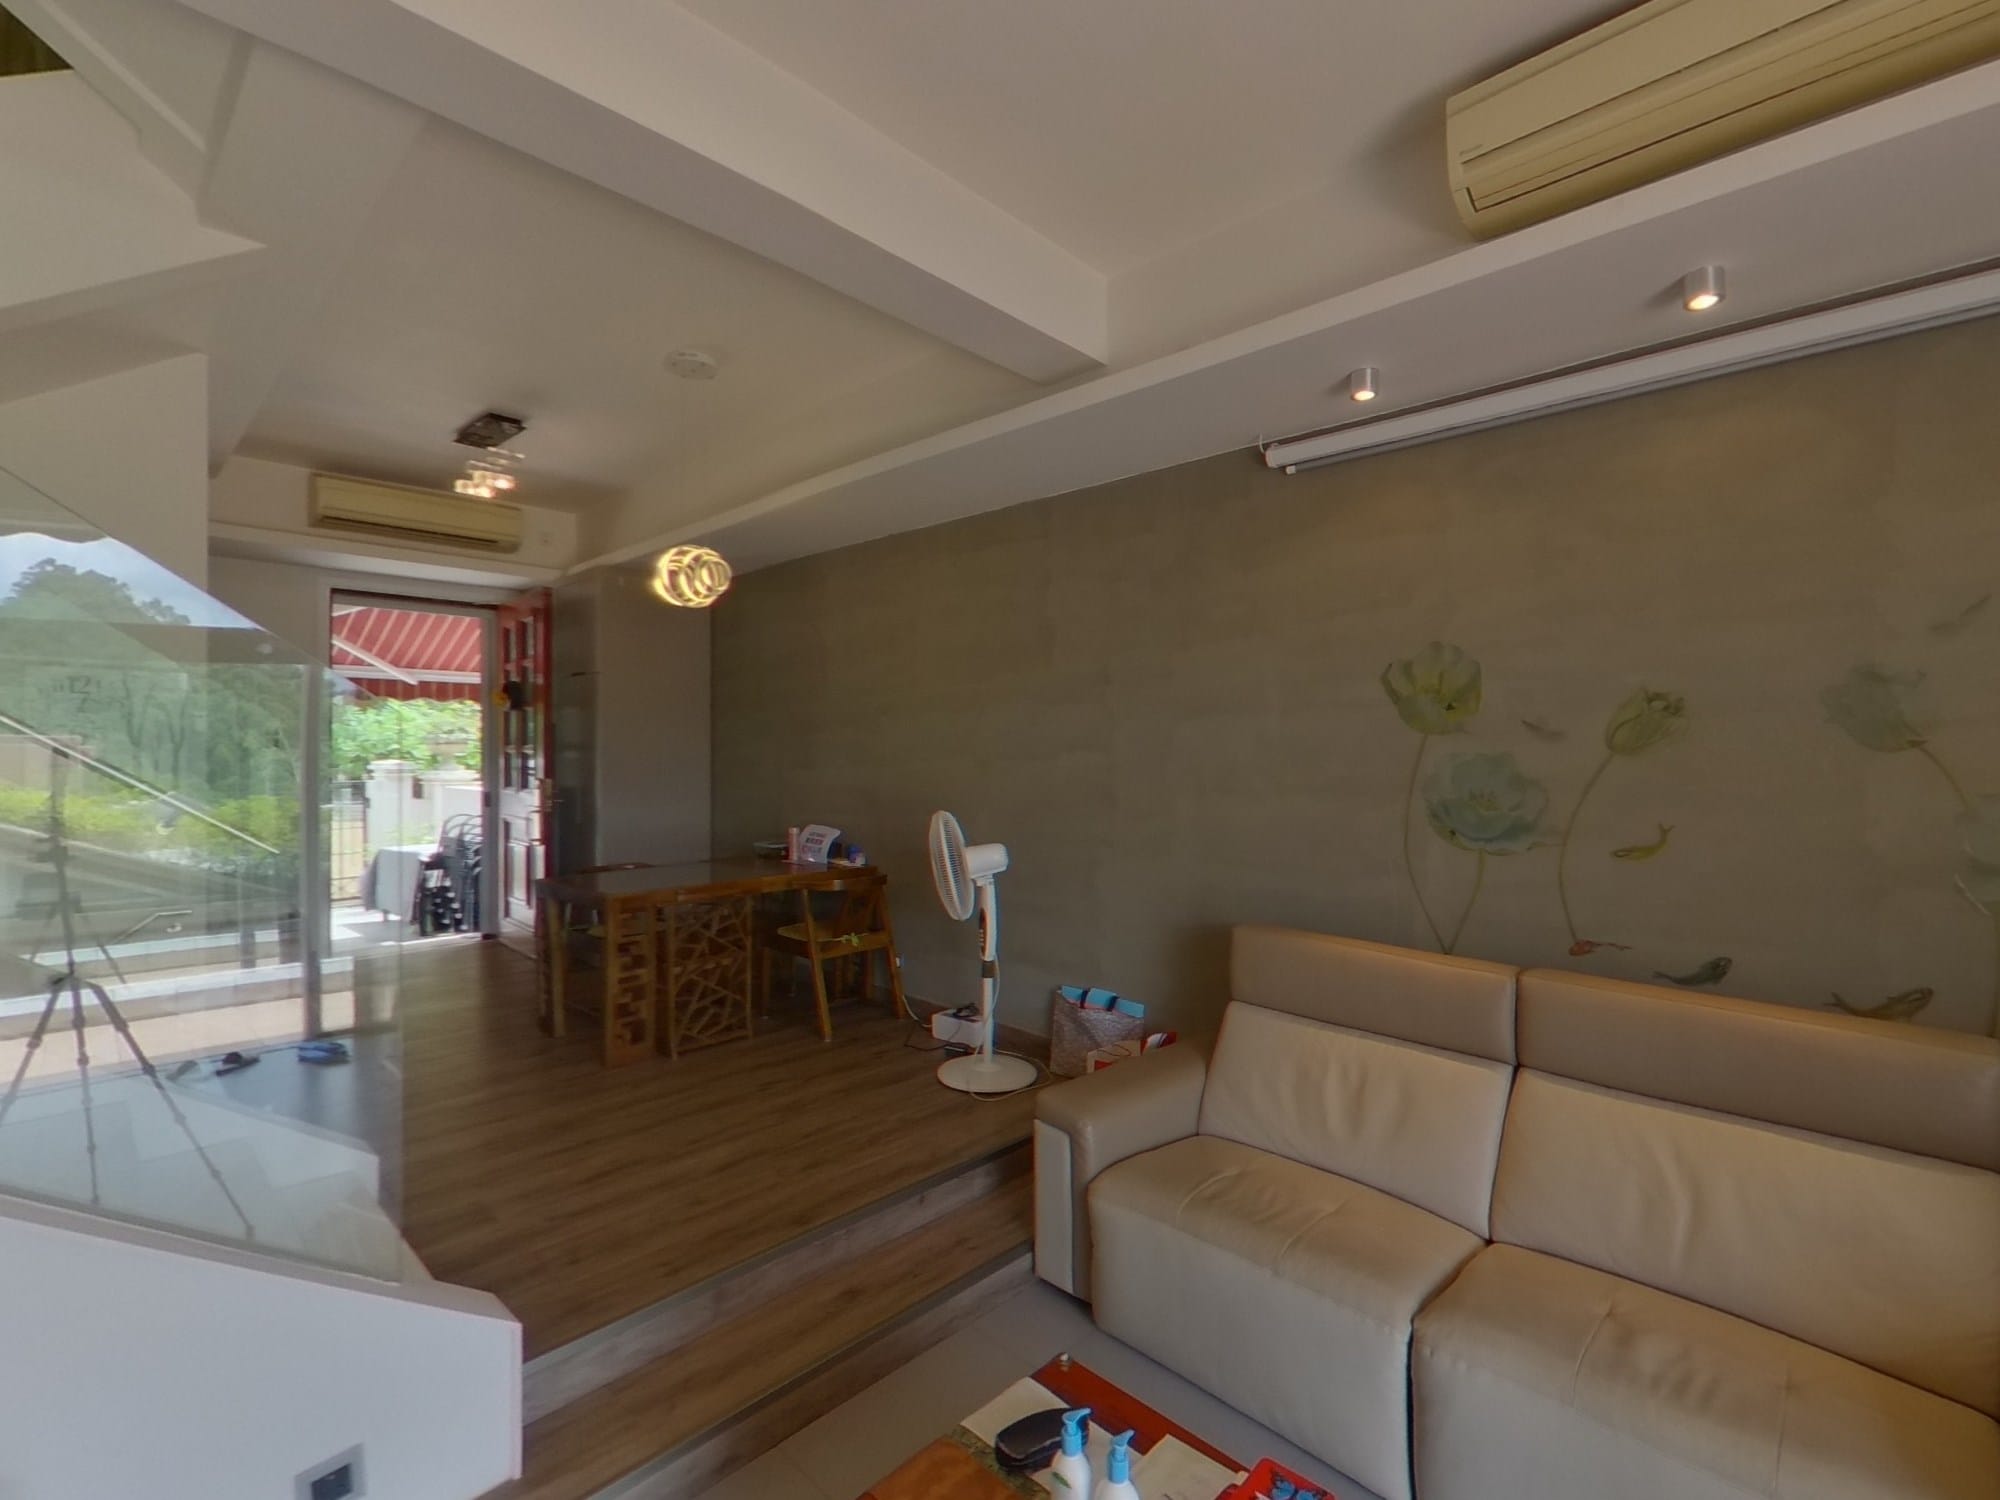 BEVERLY HILLS Tai Po 1528694 For Buy